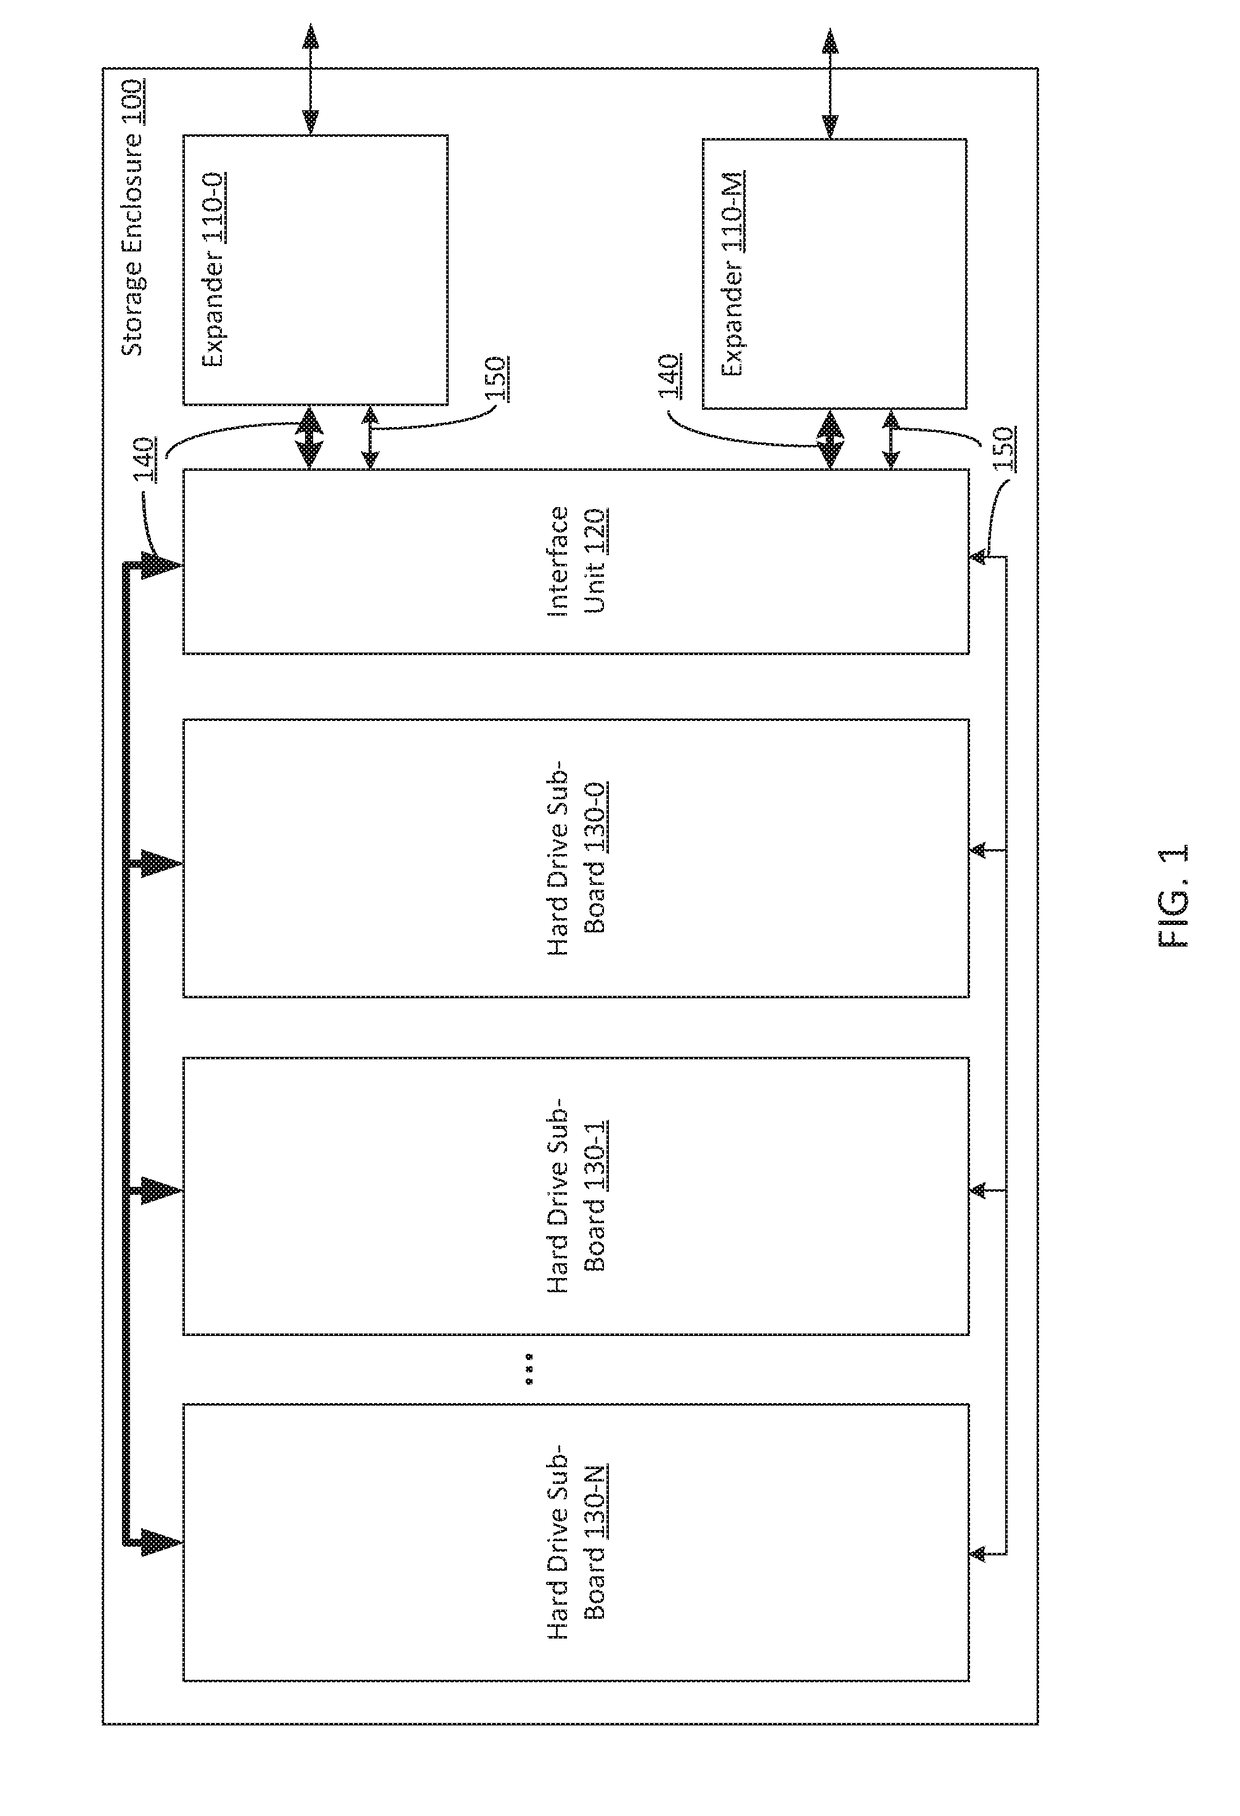 Storage enclosure with daisy-chained sideband signal routing and distributed logic devices